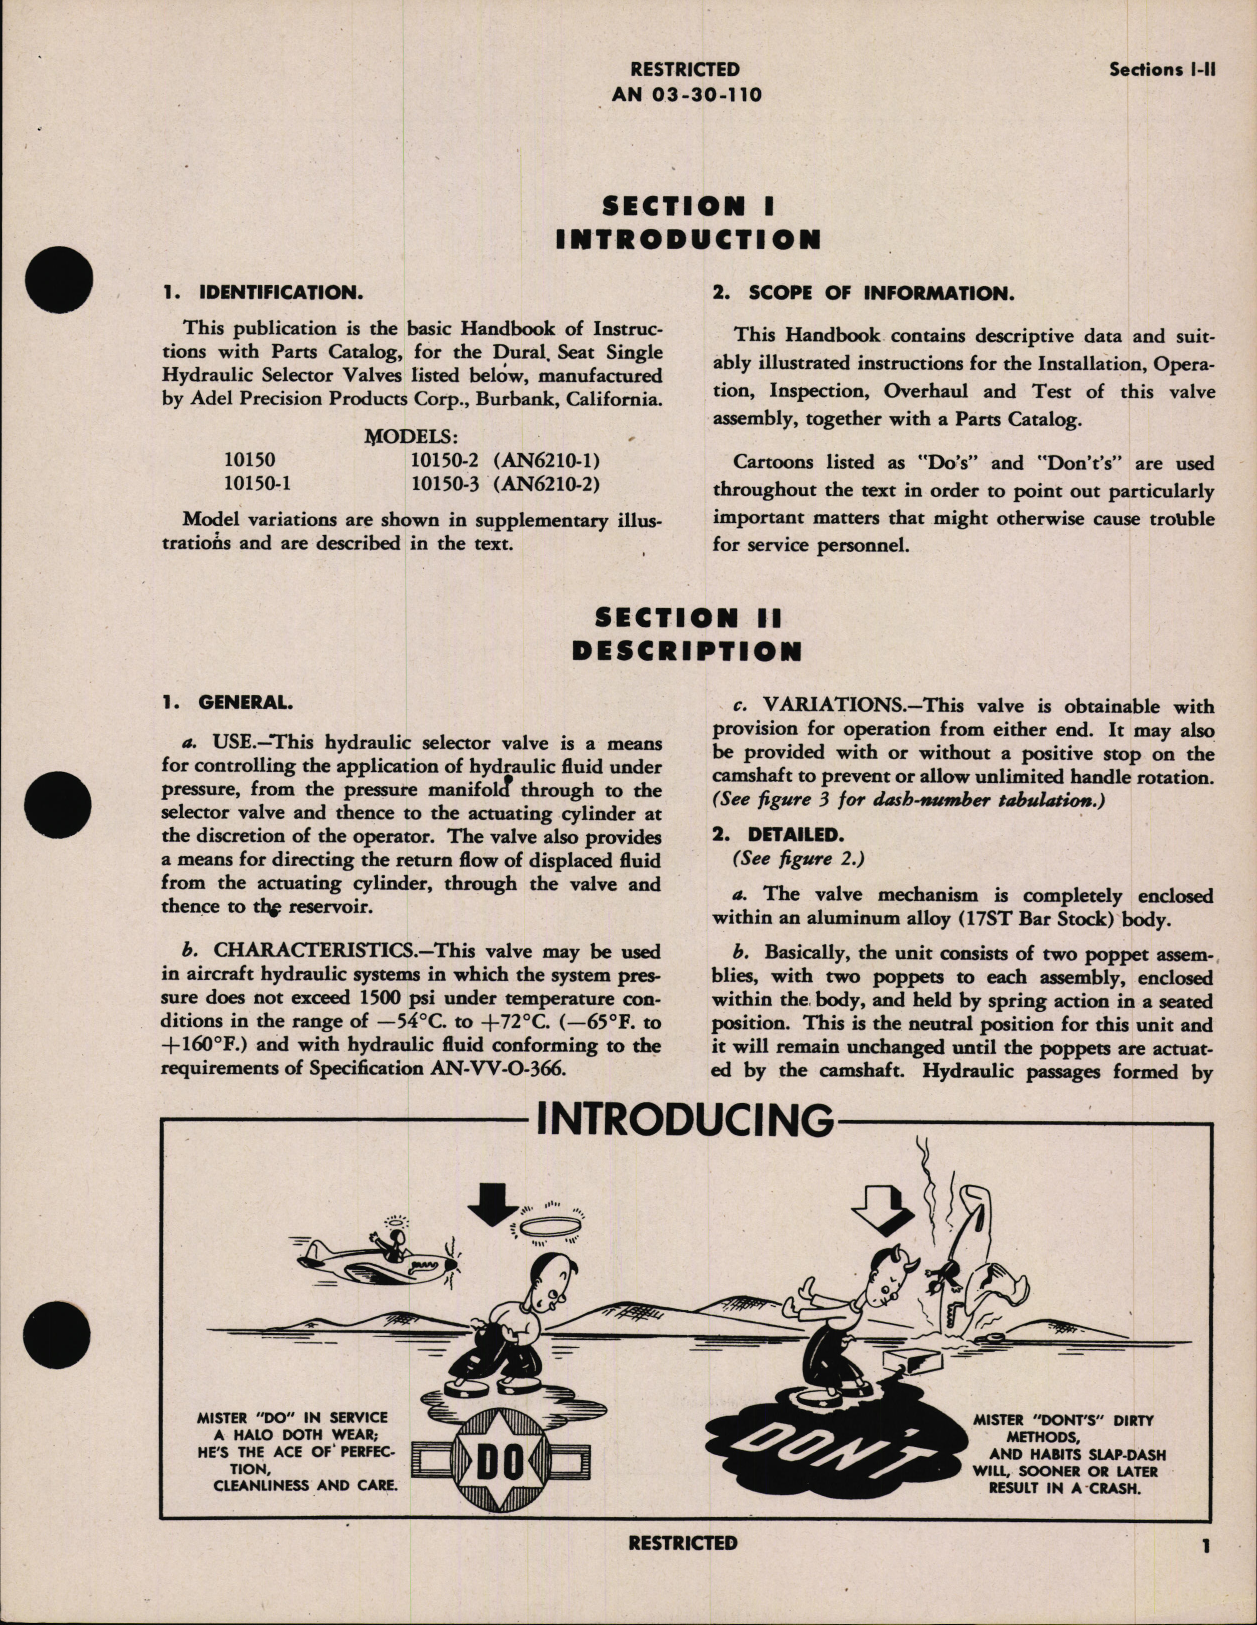 Sample page 5 from AirCorps Library document: Handbook of Instructions with Parts Catalog for Dural Seat Single Hydraulic Selector Valves